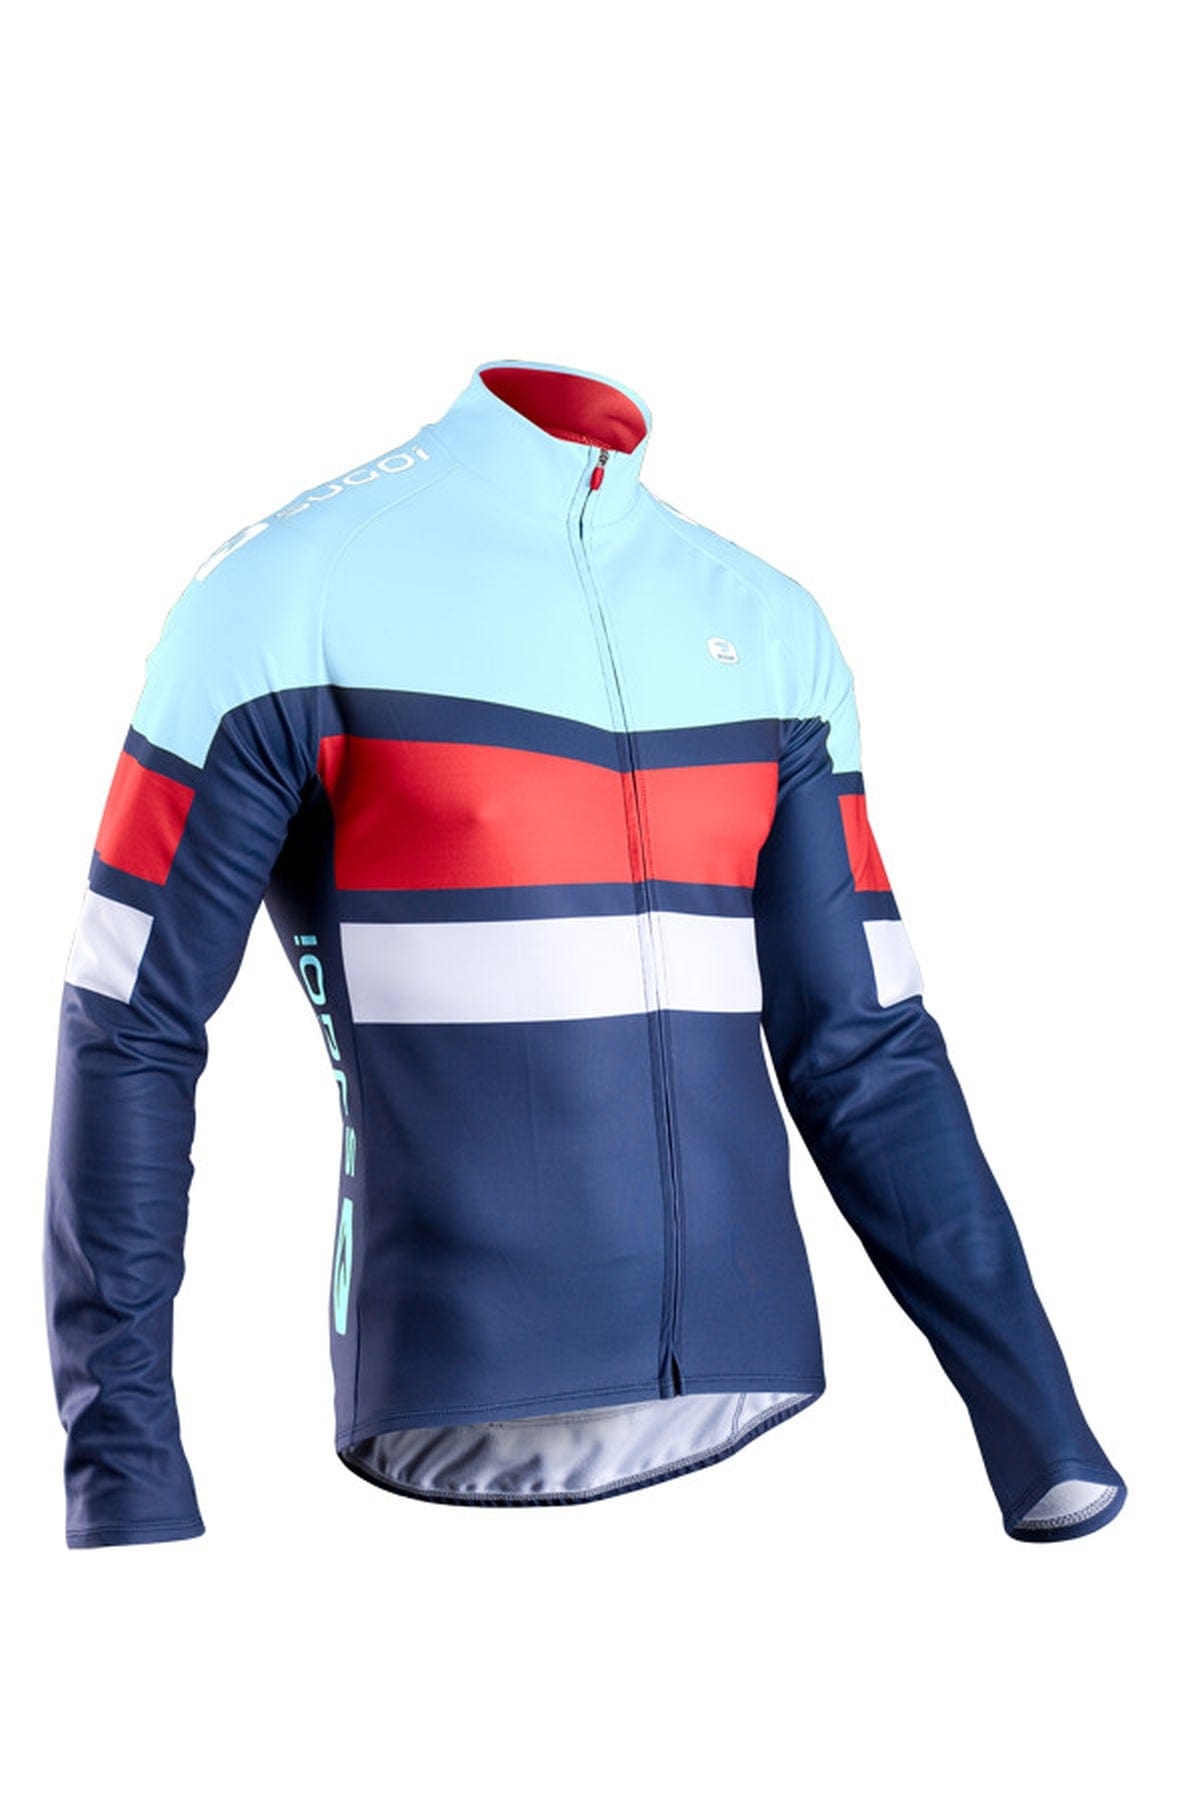 Cycle Tribe Product Sizes Sugoi Evolution PRO L/S Jersey